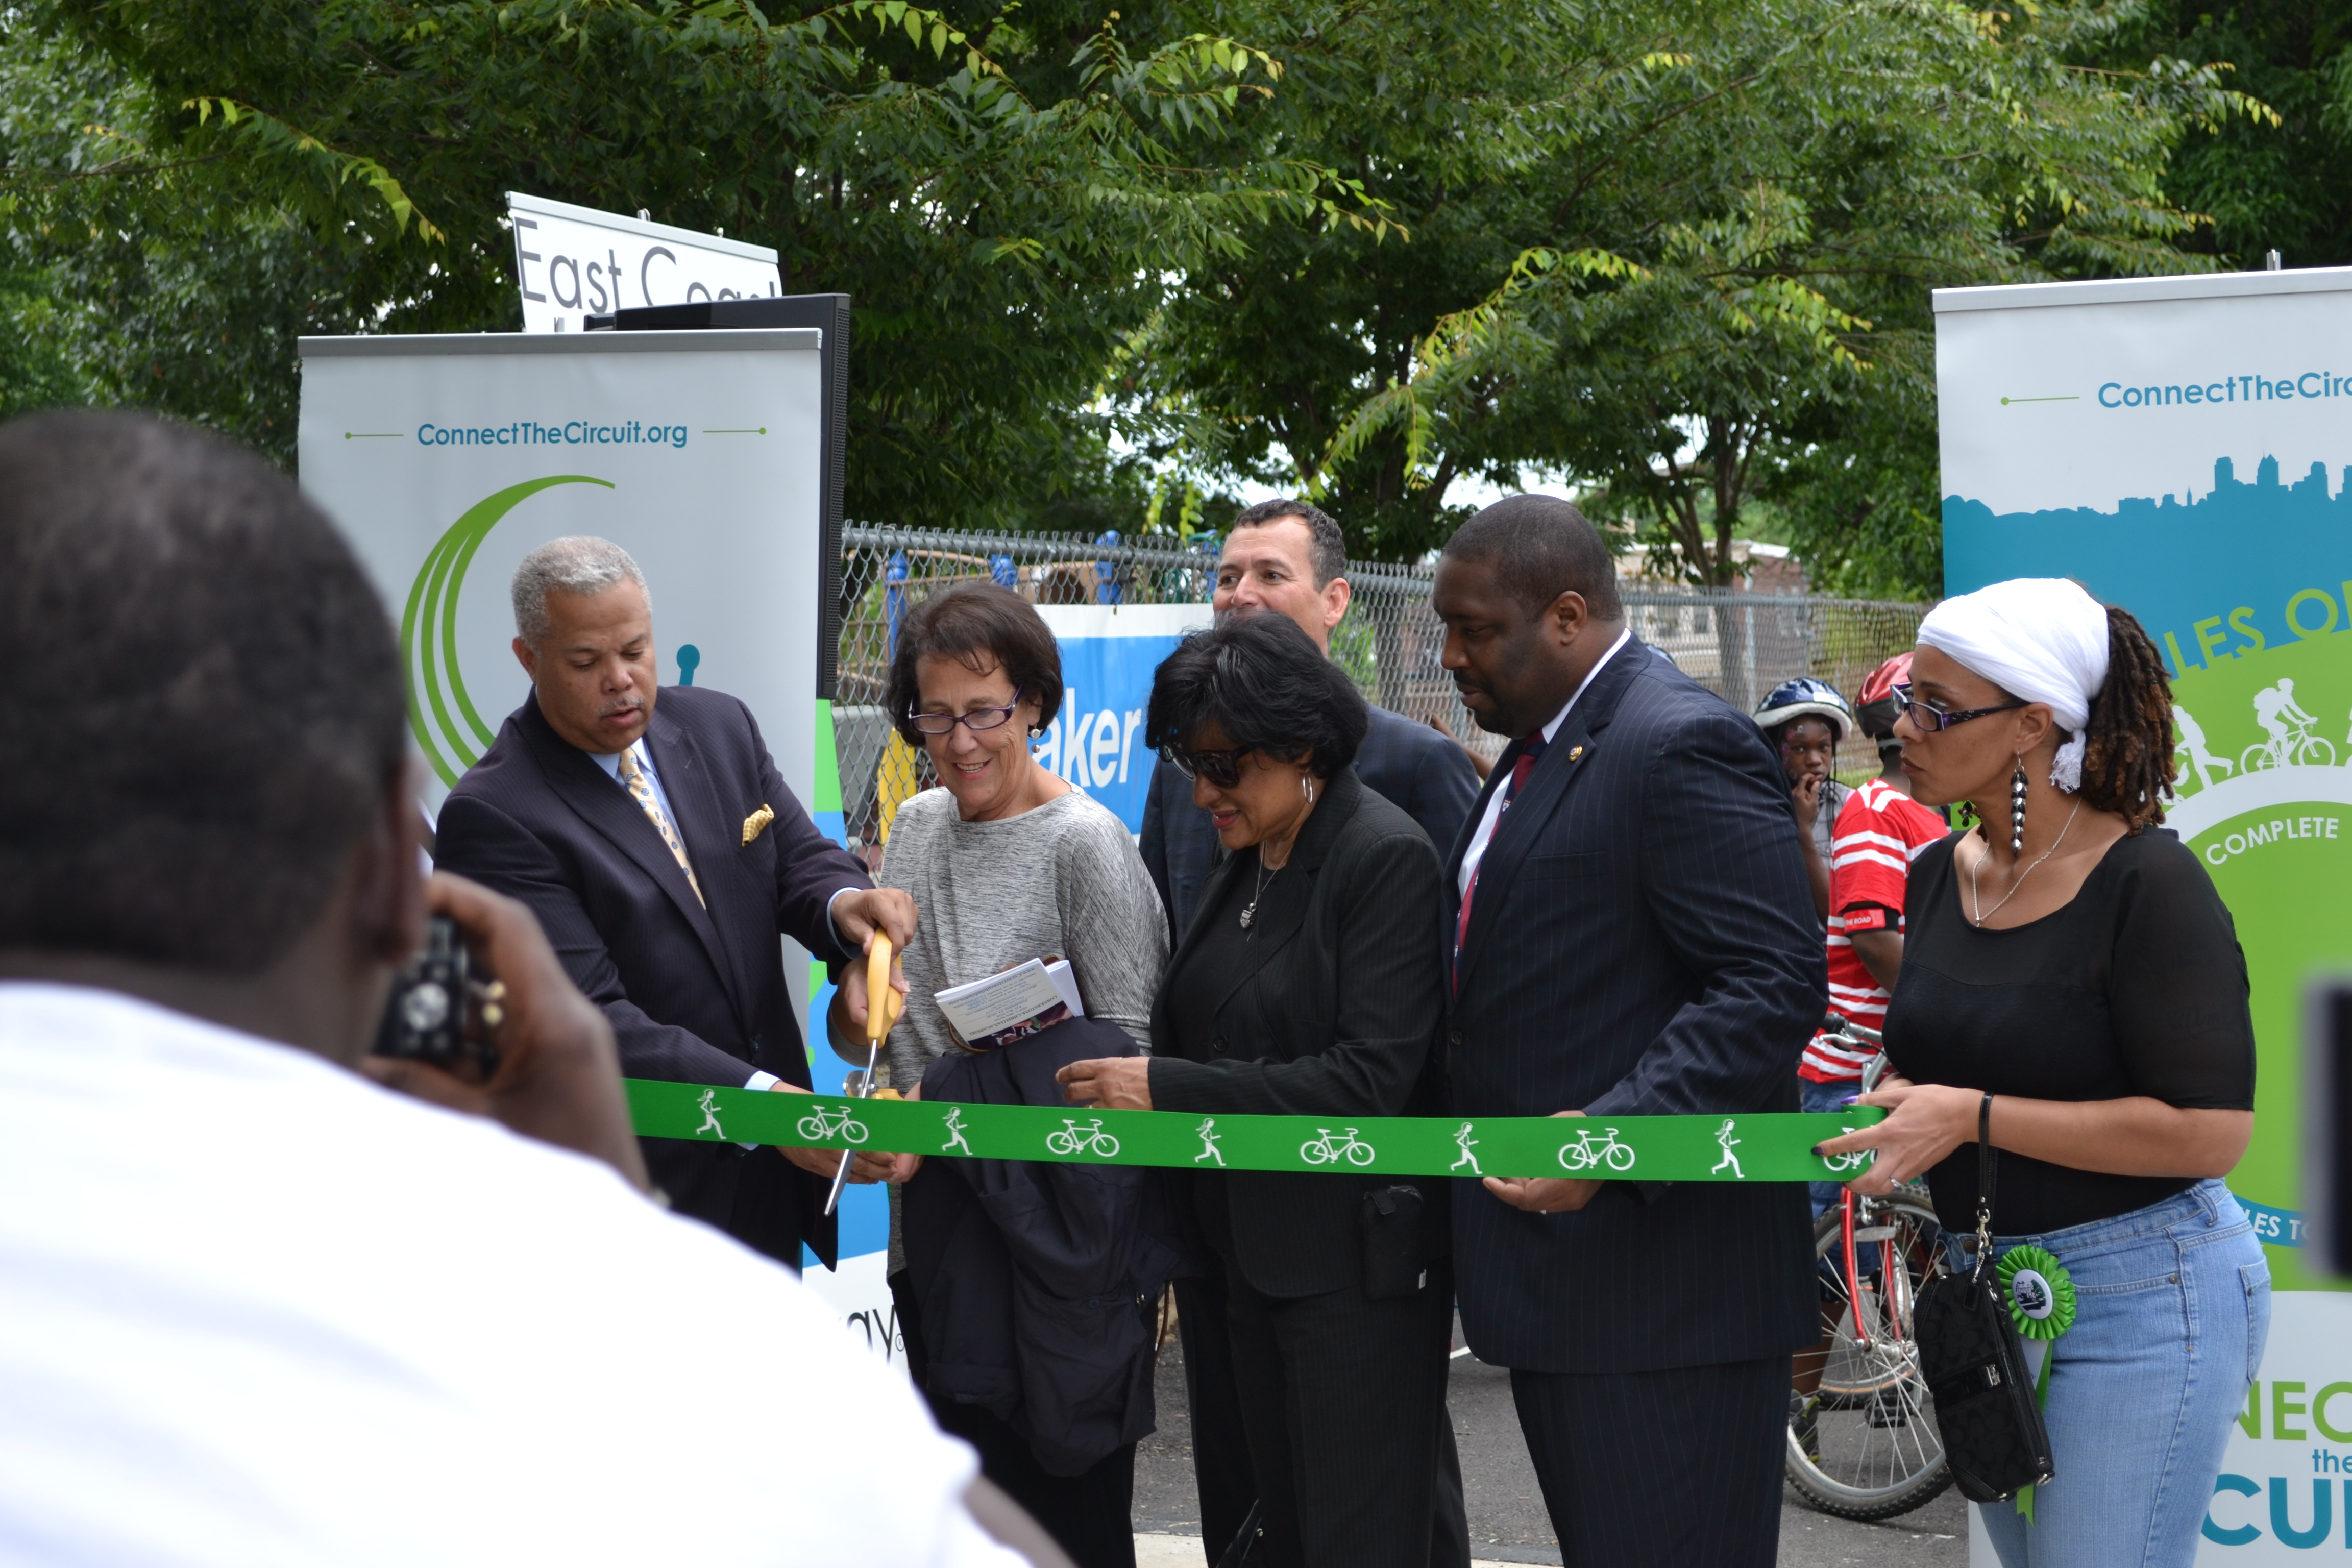 City and state officials along with project leaders cut the 58th Street Greenway ribbon